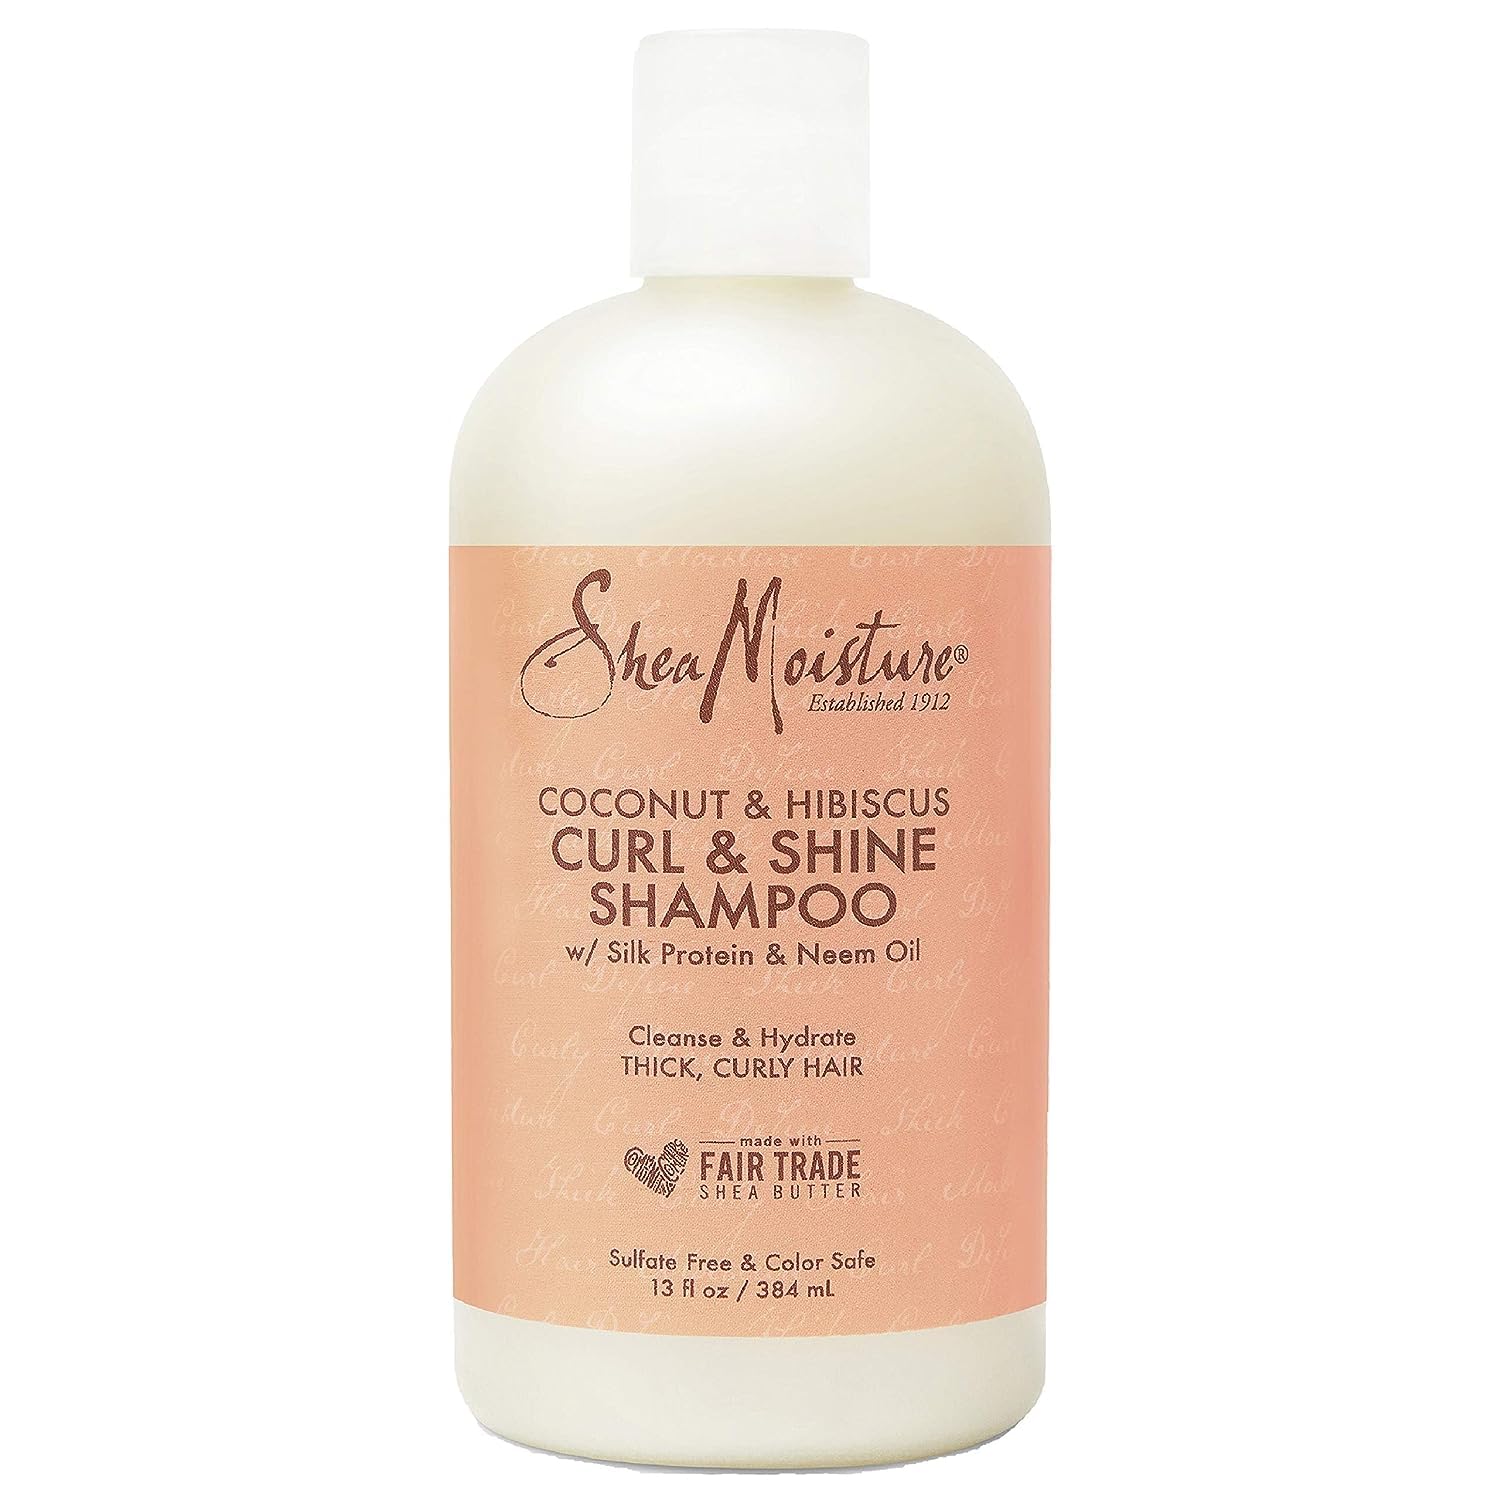 SheaMoisture Curl and Shine Coconut Shampoo Coconut and Hibiscus for Curly Hair Paraben Free Shampoo 13 oz